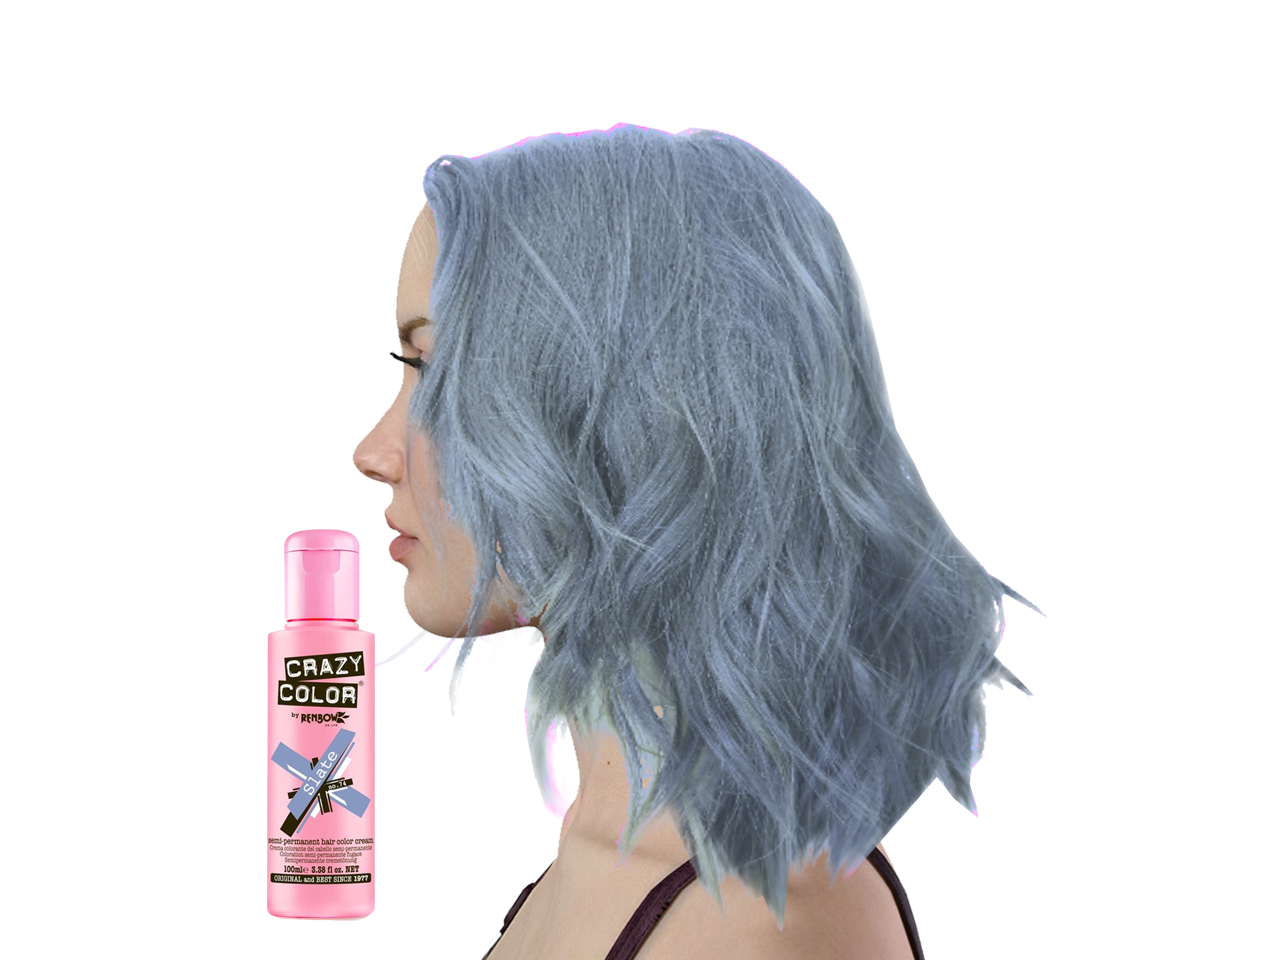 2. "How to Achieve the Perfect Slate Blue Hair Color at Home" - wide 4